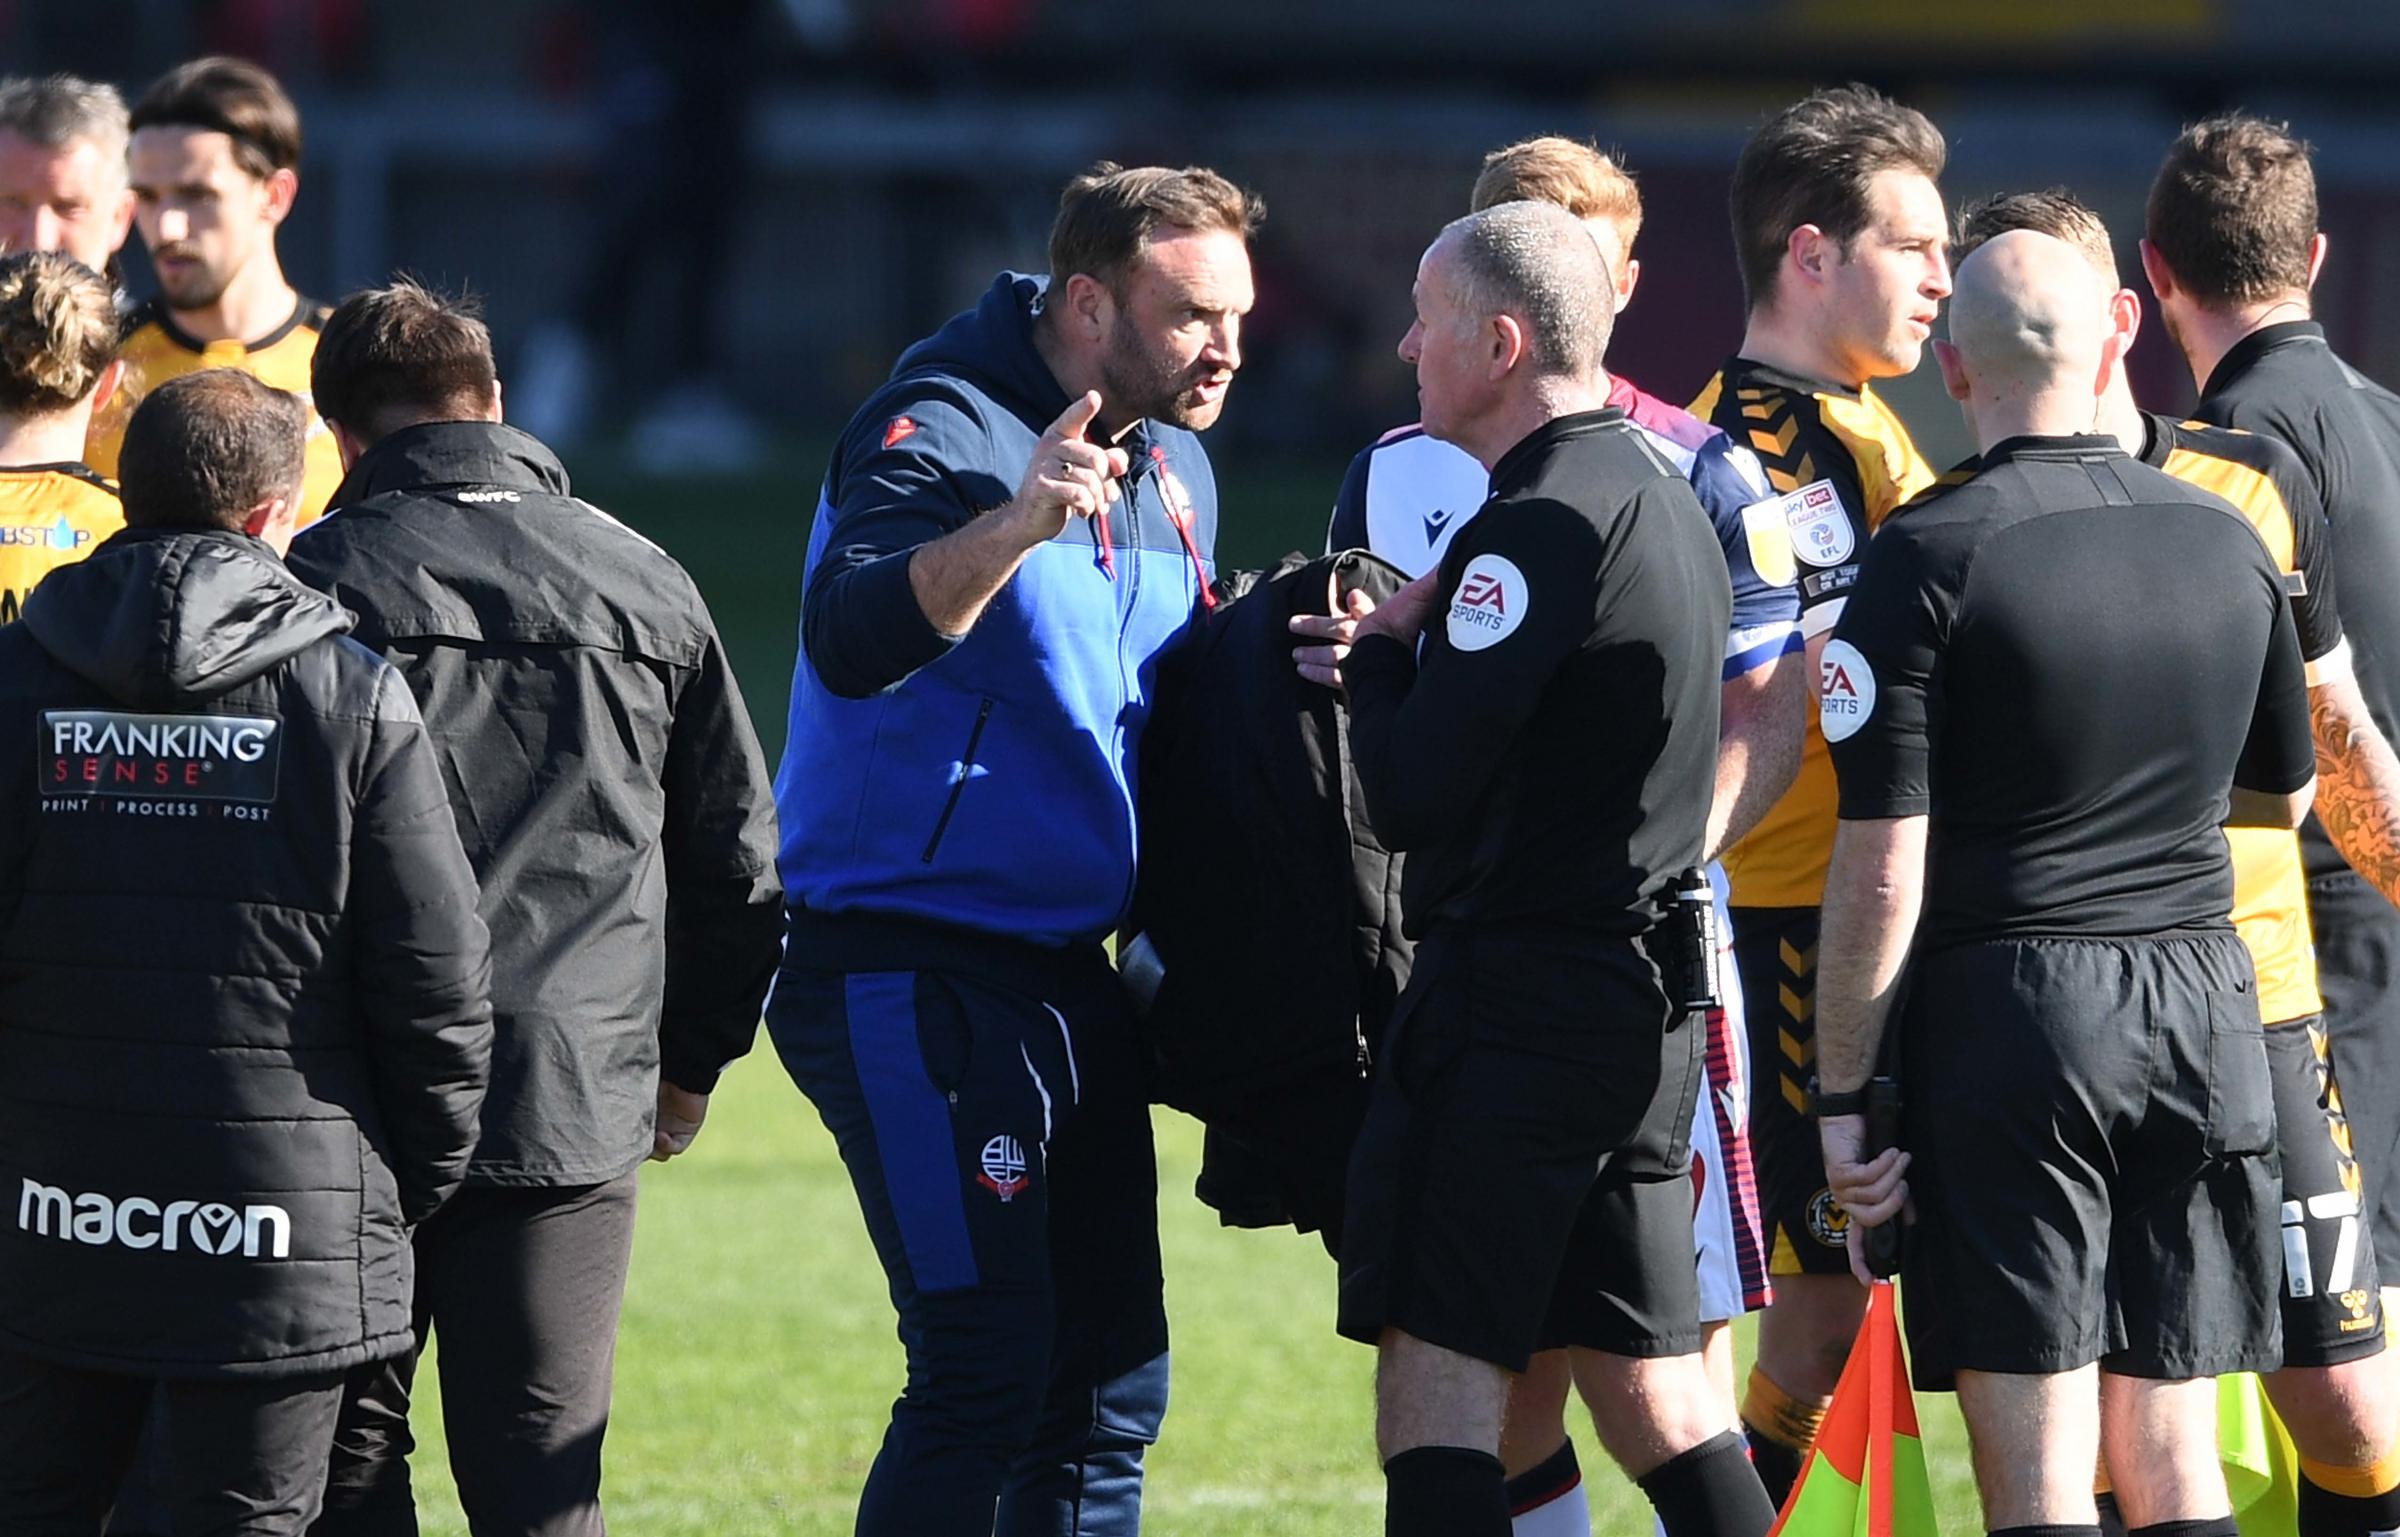 FRUSTRATED: Bolton Wanderers Manager Ian Evatt confronts the referee at the end of the game.